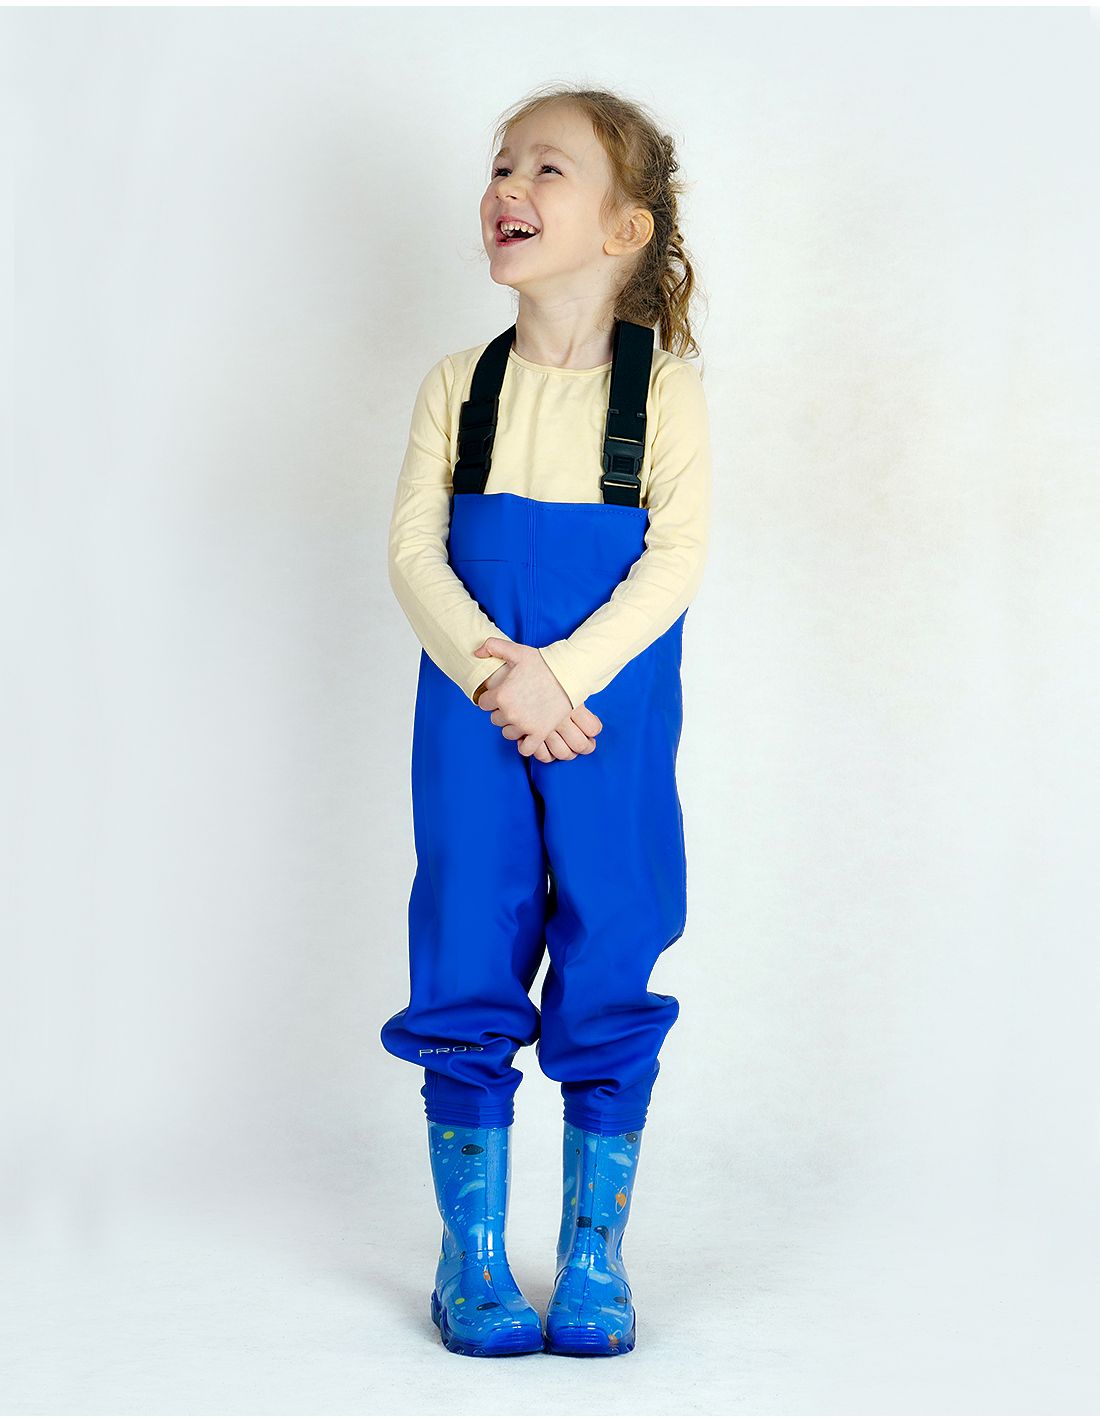 Childrens Chest Waders - PROS